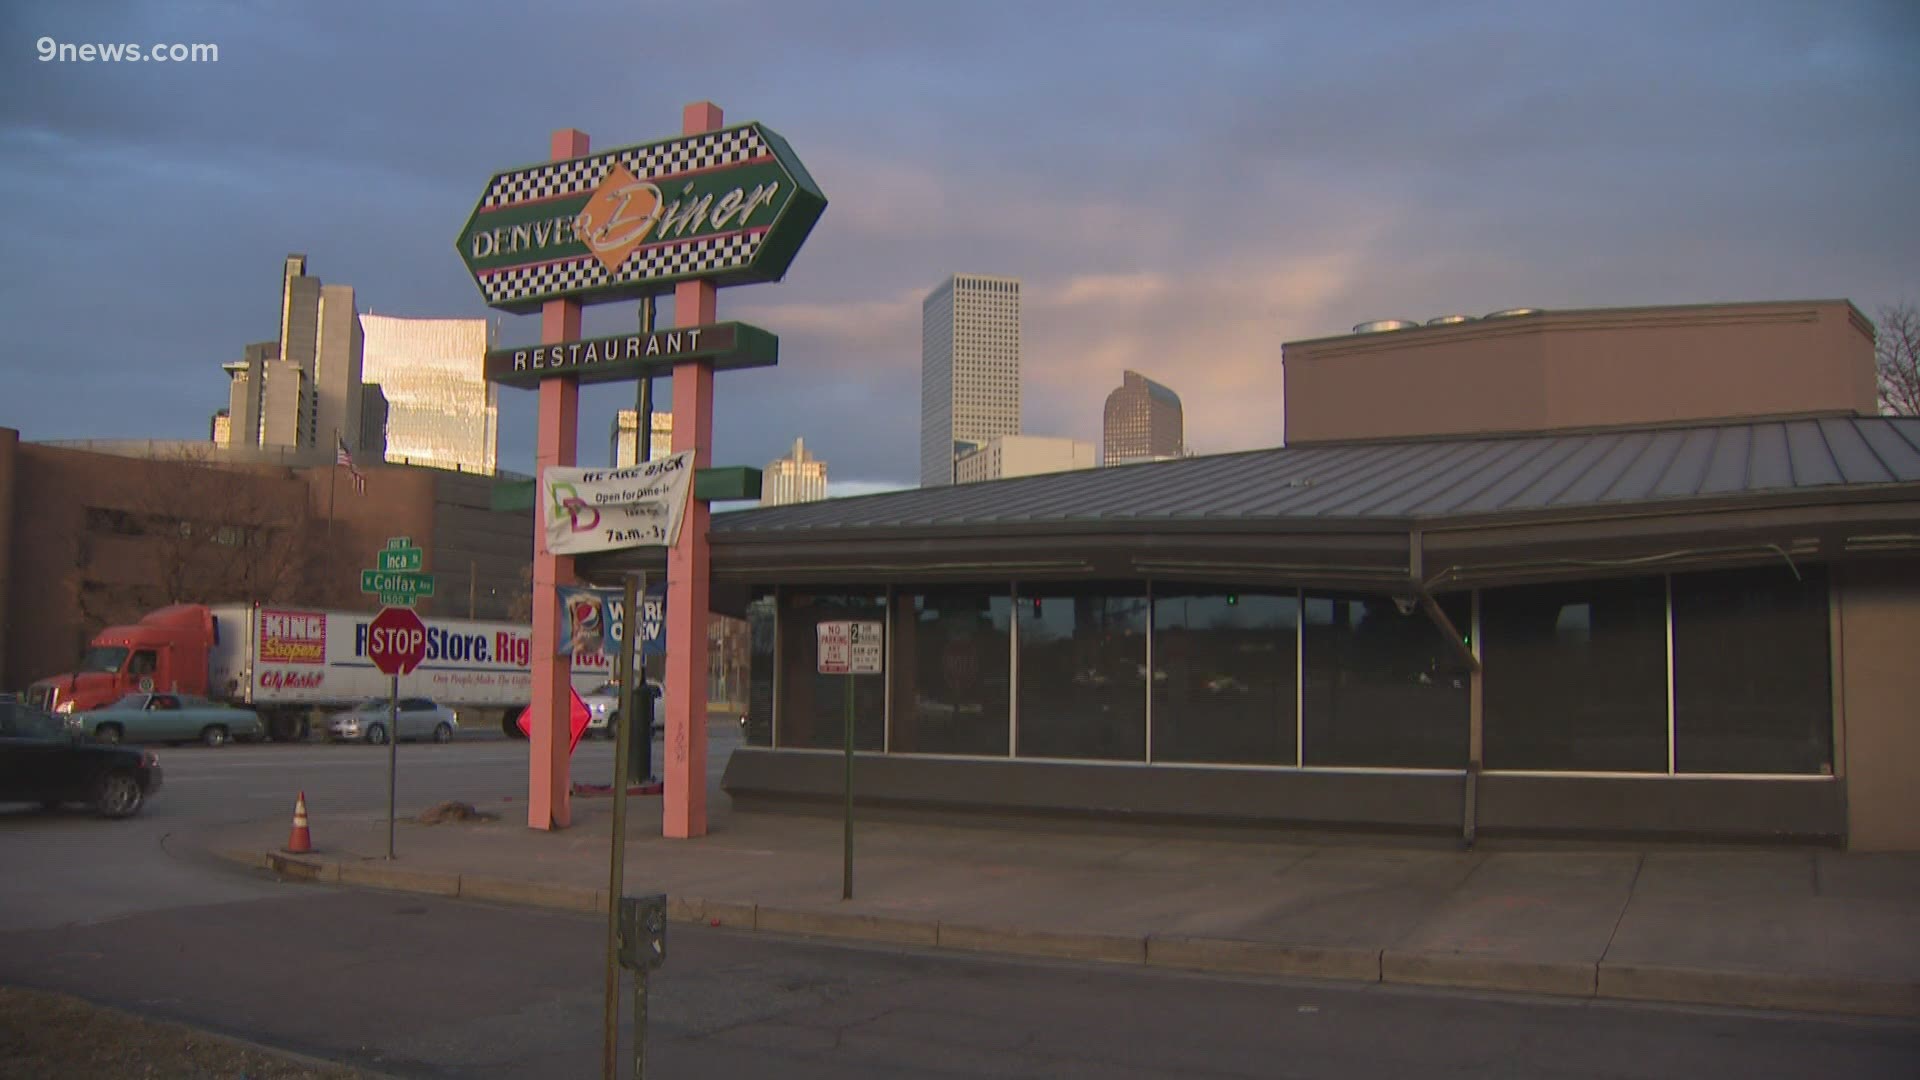 The restaurant has been on Colfax Avenue and Speer Boulevard for 30 years.